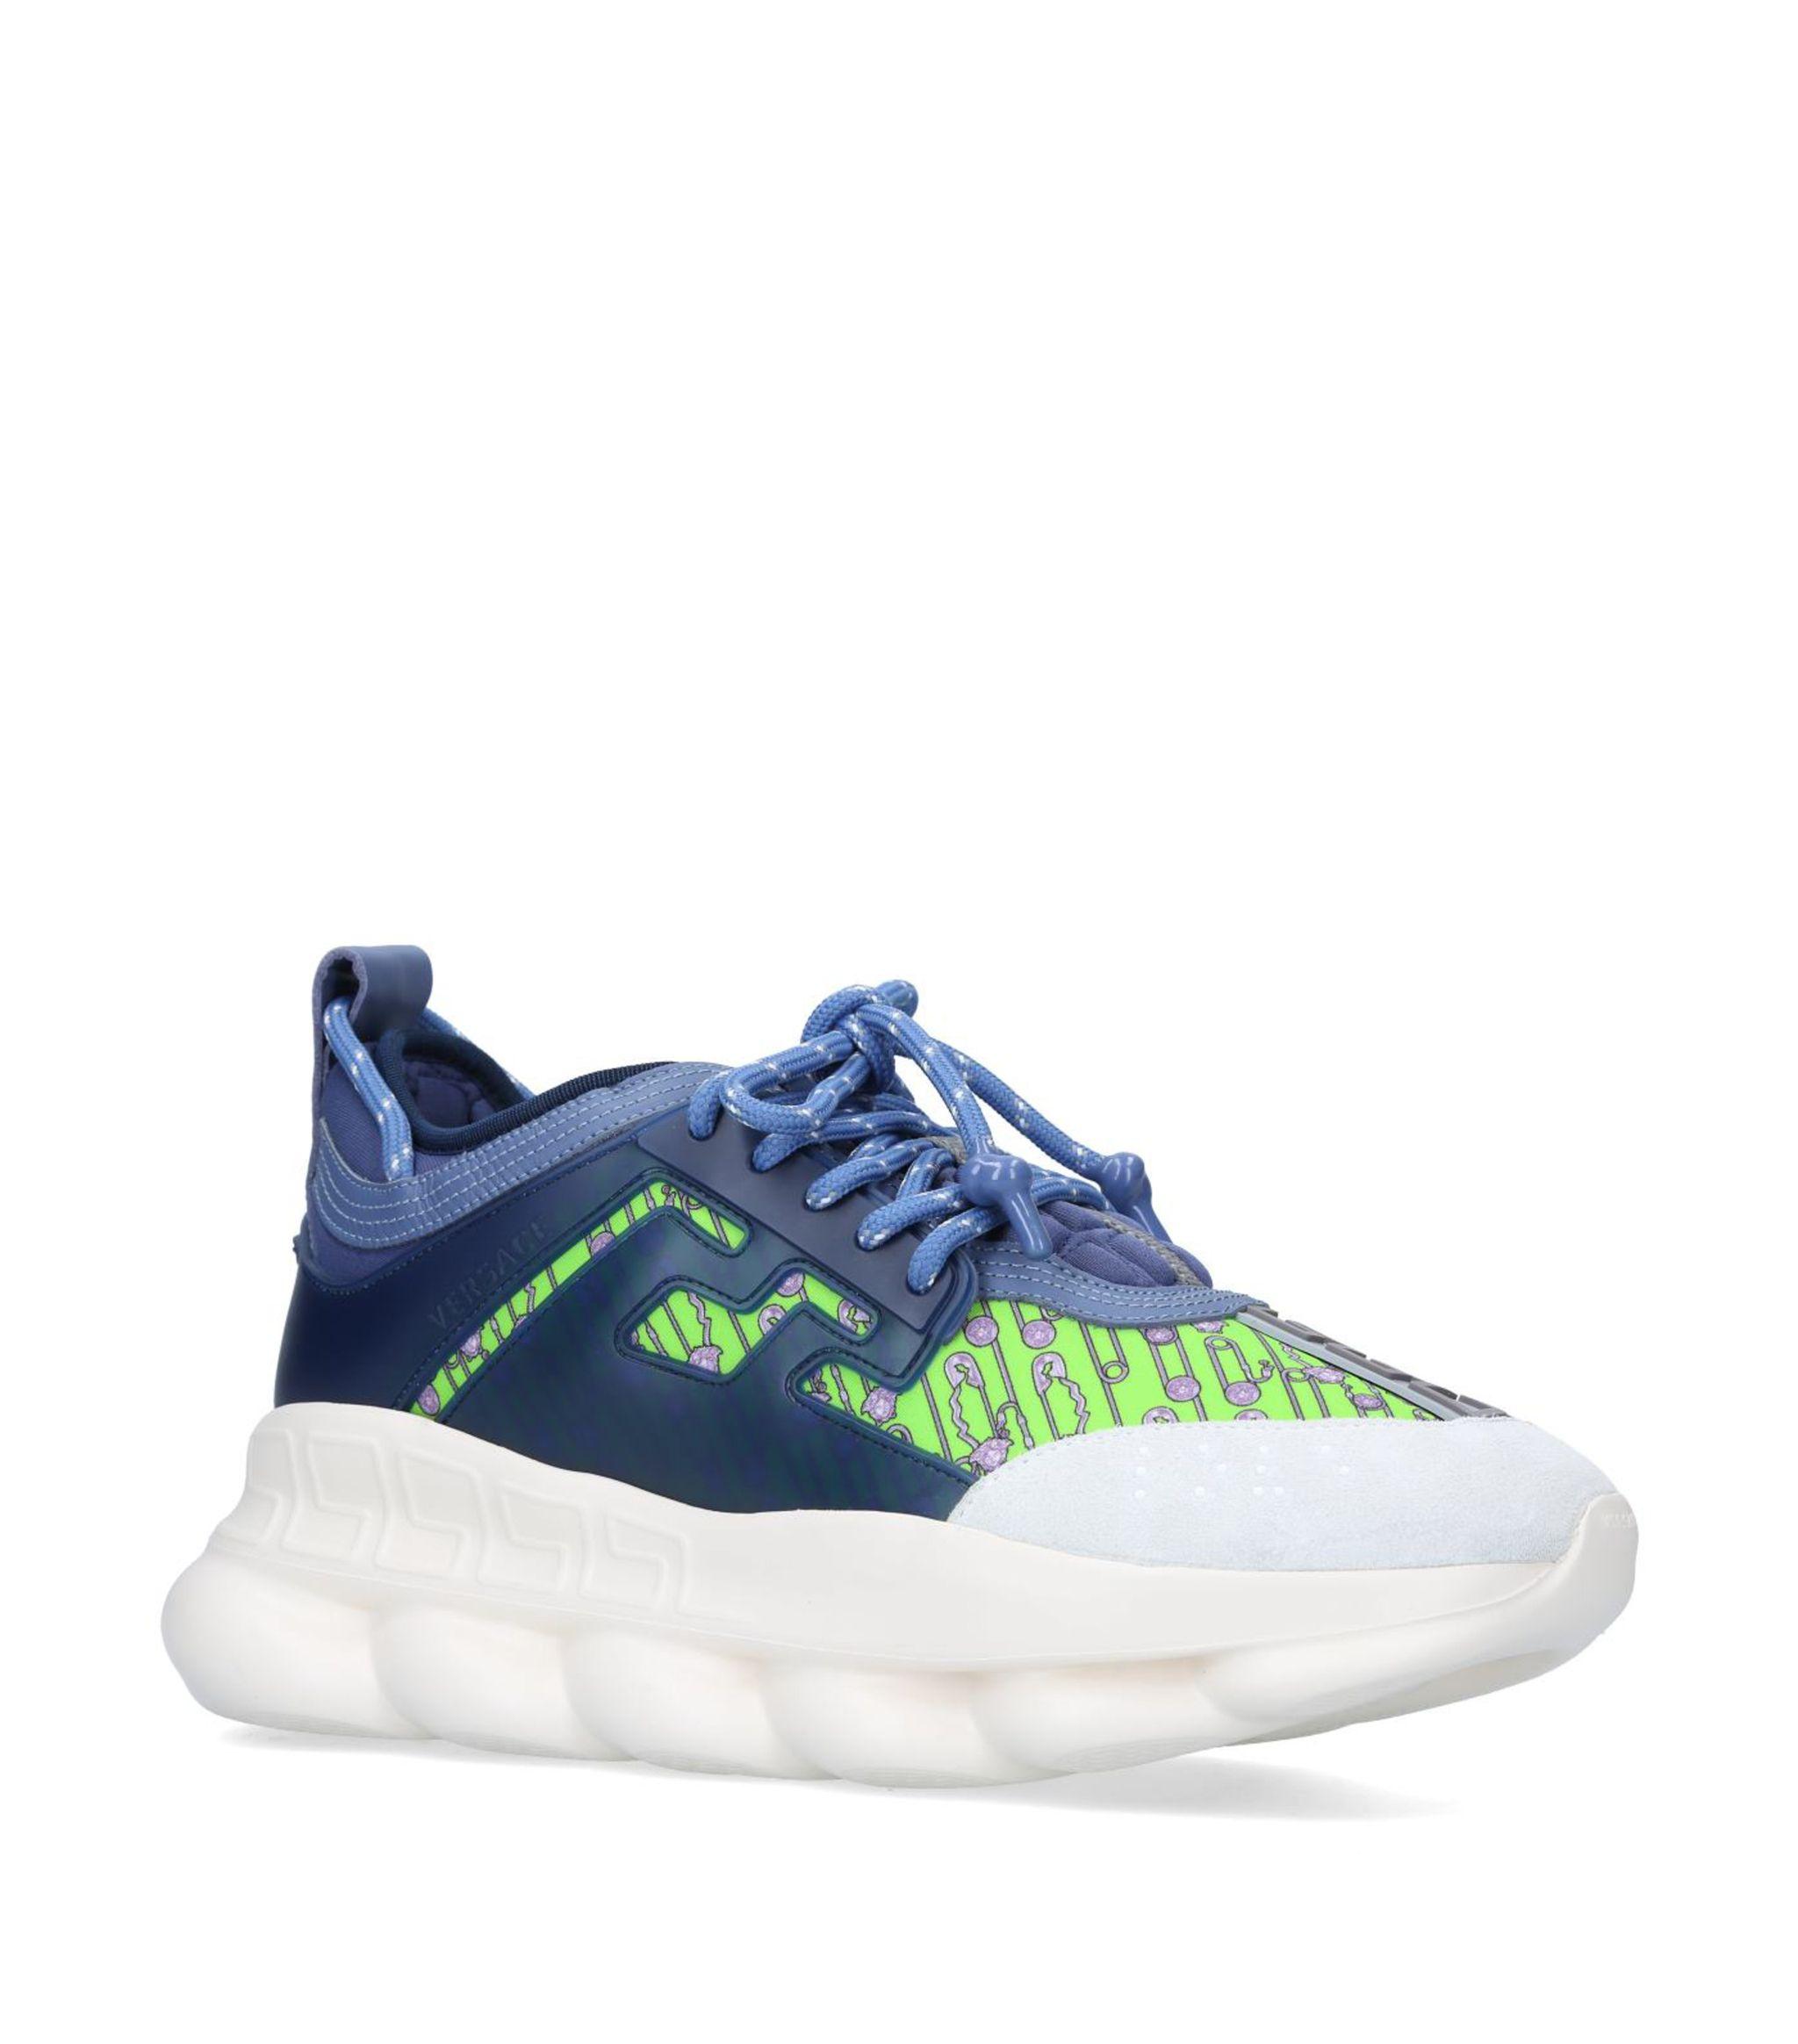 Versace Synthetic Chain Reaction Sneakers in Blue for Men - Lyst